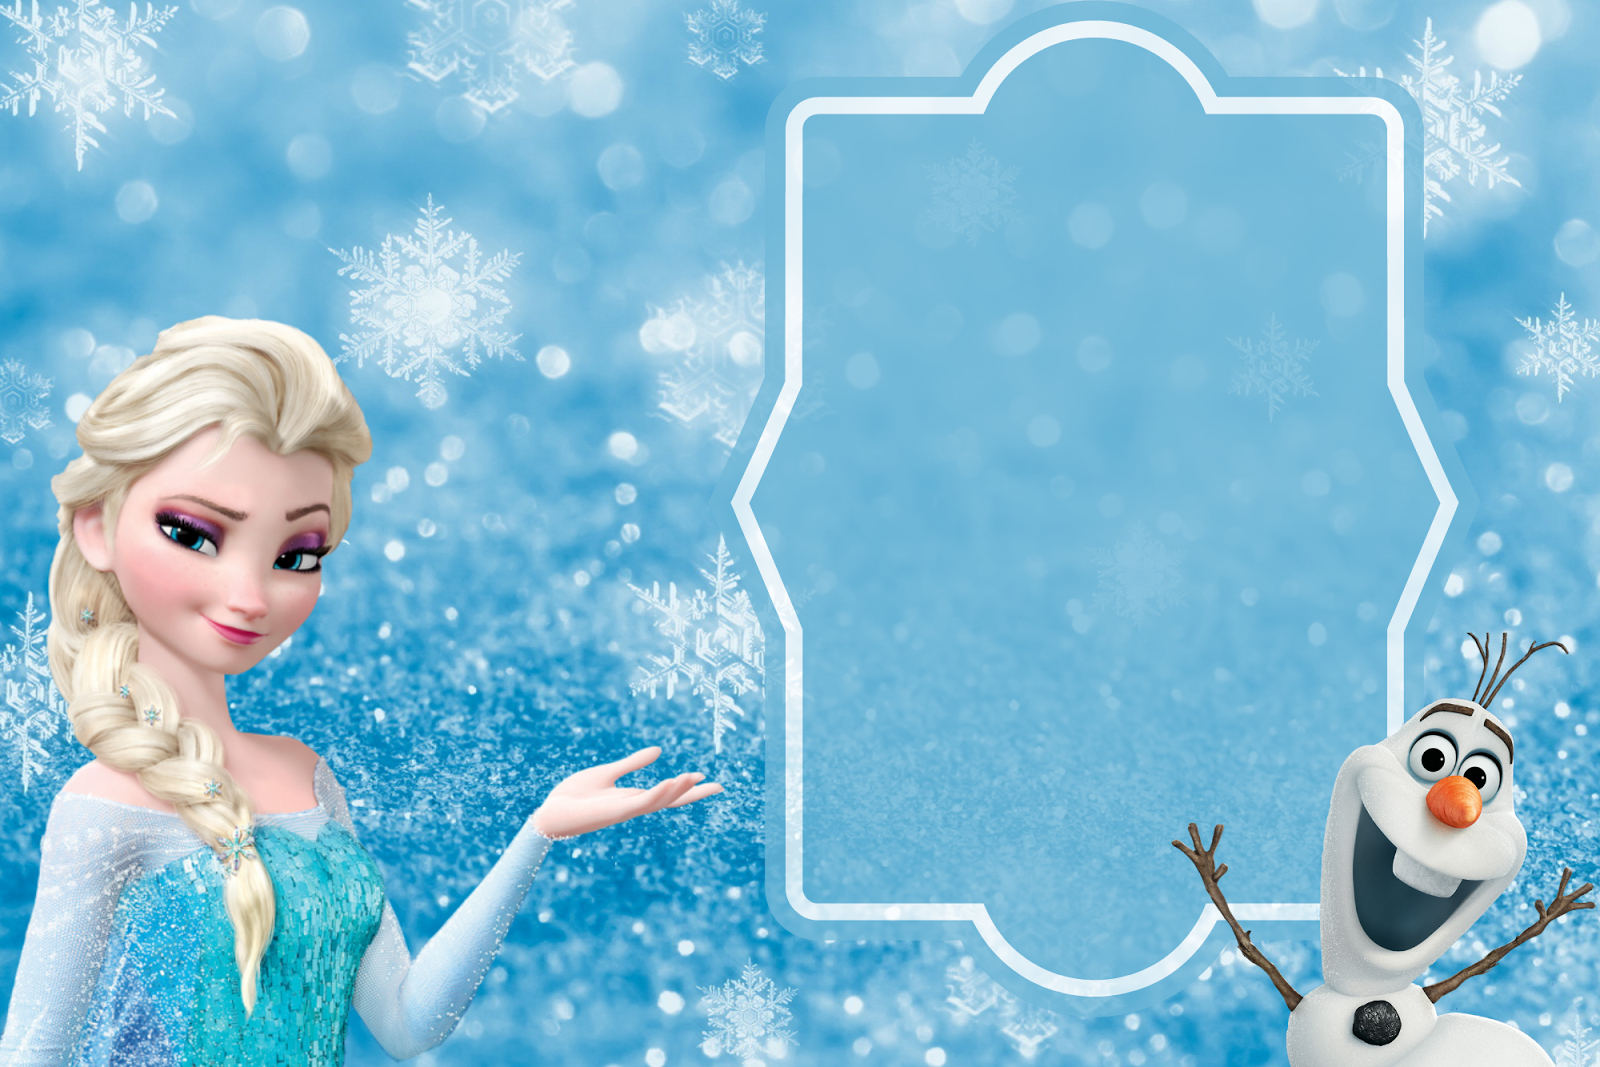 Free Frozen Party Invitation Template Download Party Ideas And within proportions 1600 X 1067